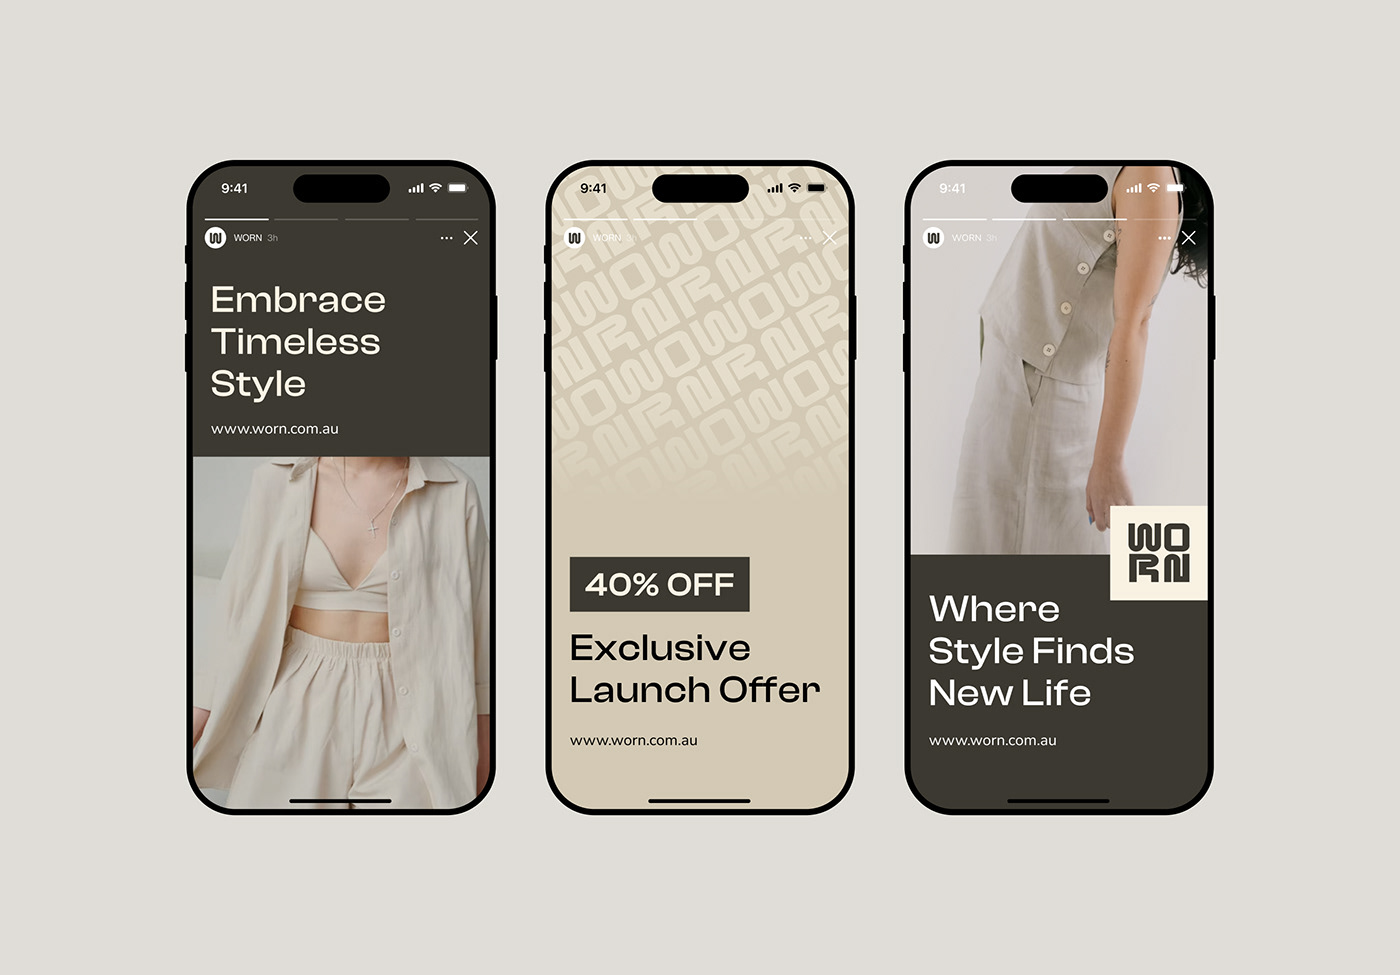 mobile device mockups showing the Instagram story design created for WORN, Australian fashion brand